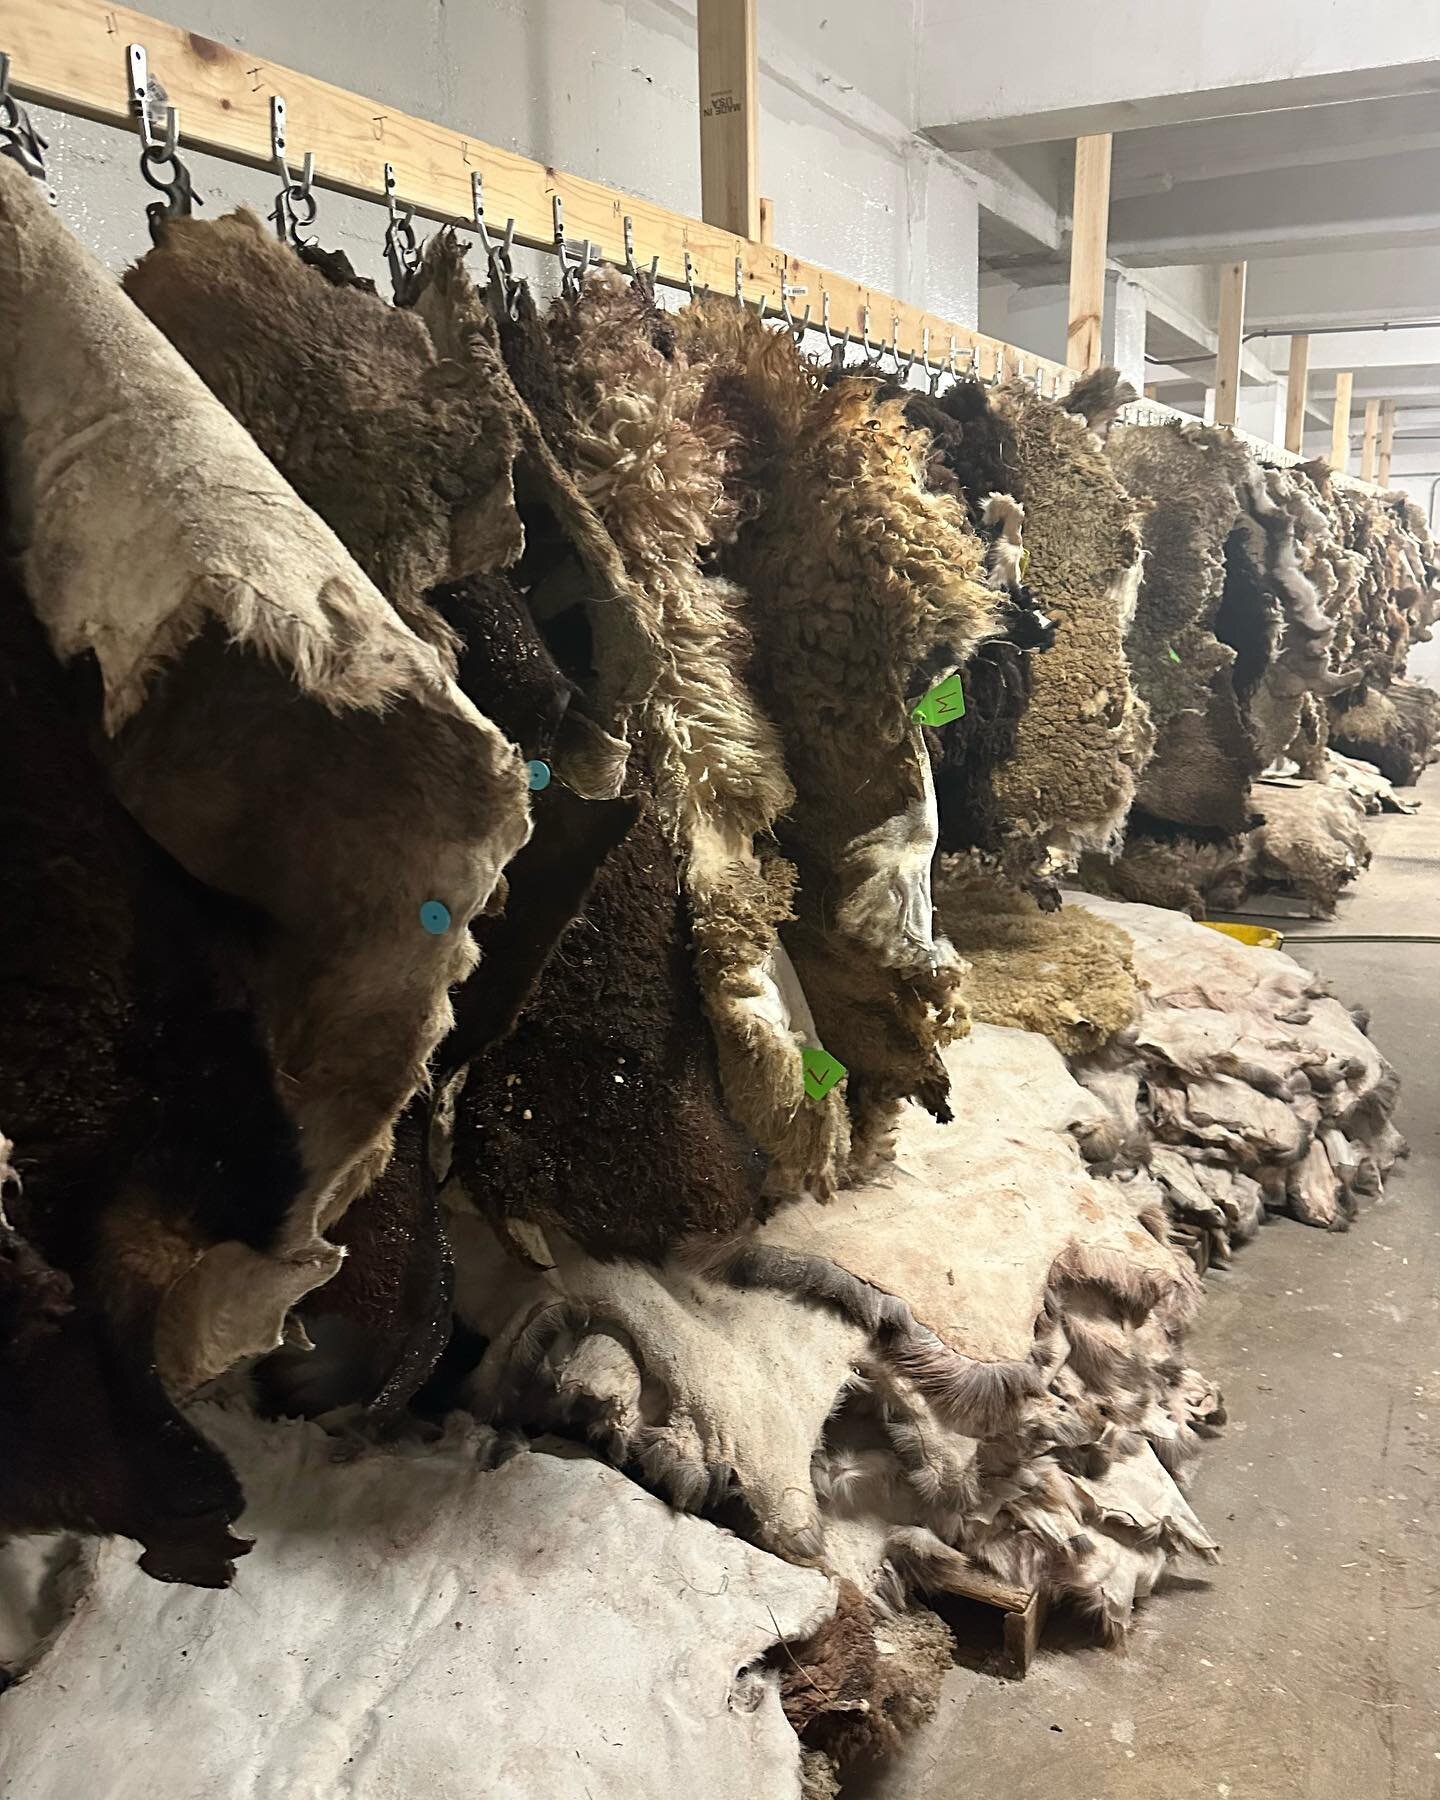 We traveled to the Driftless hills of SW Wisconsin to deliver our sheep hides to the woman-owned @driftlesstannery that uses all natural methods for tanning hides.

We got an amazing tour and saw some amazing hides that are drying and finishing. And 